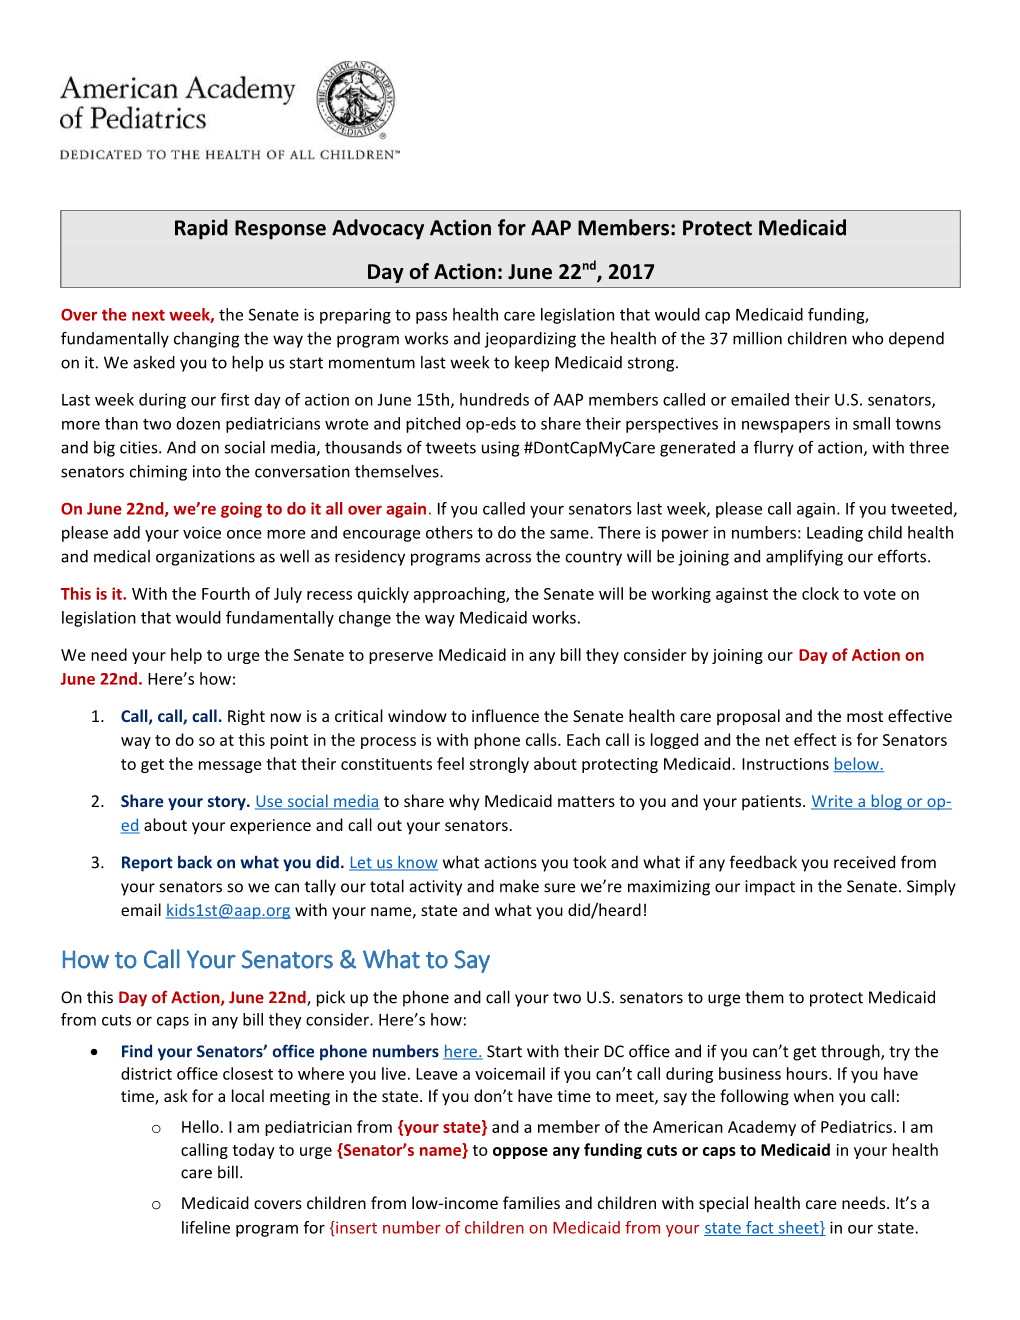 Rapid Response Advocacy Action for AAP Members: Protect Medicaid